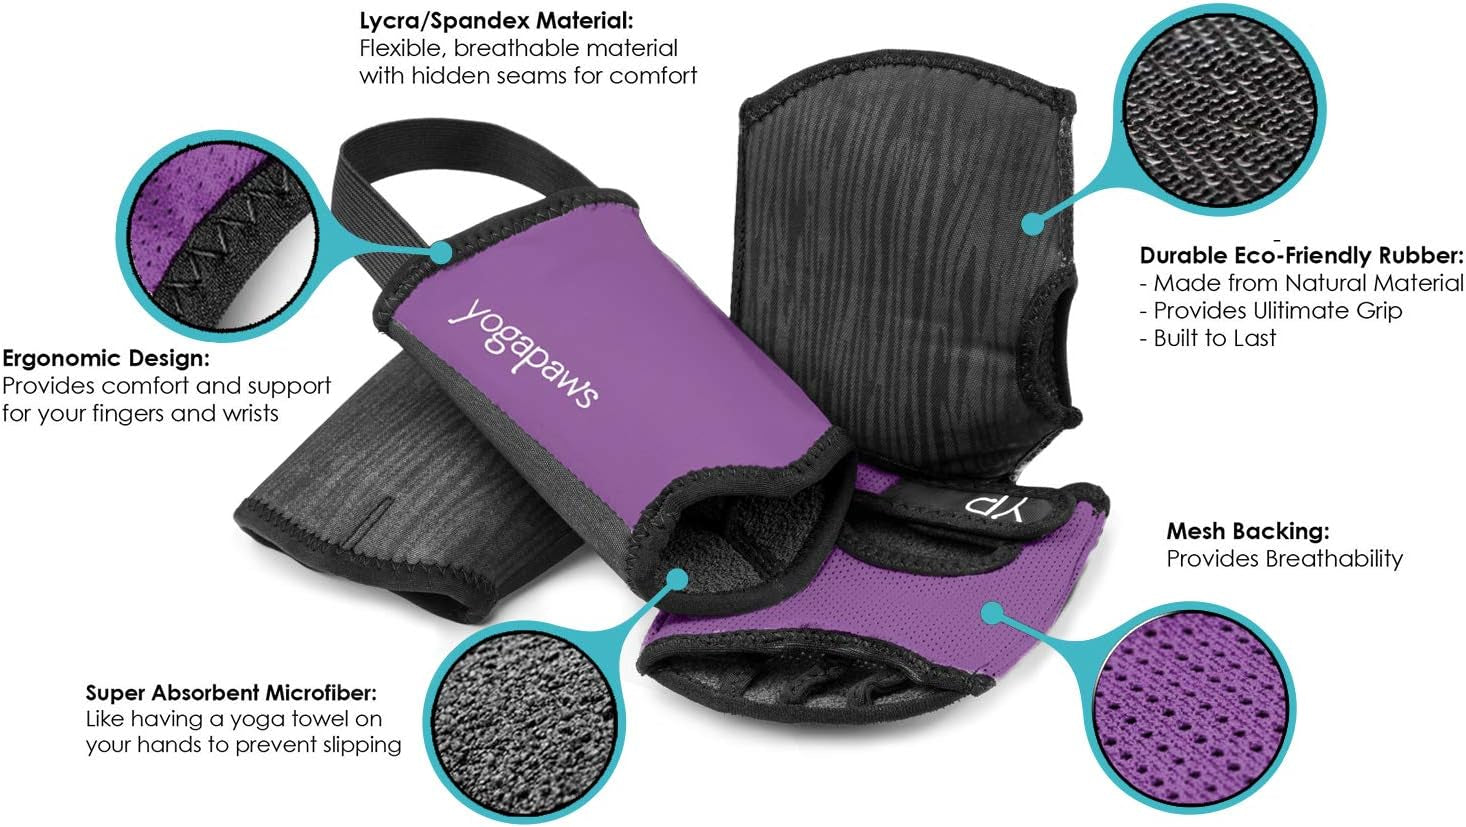 Professional title: " Skinthin Non-Slip Yoga Gloves and Socks for Enhanced Grip and Comfort during Hot Yoga, Crossfit, Cycling, and for Moisture Control"